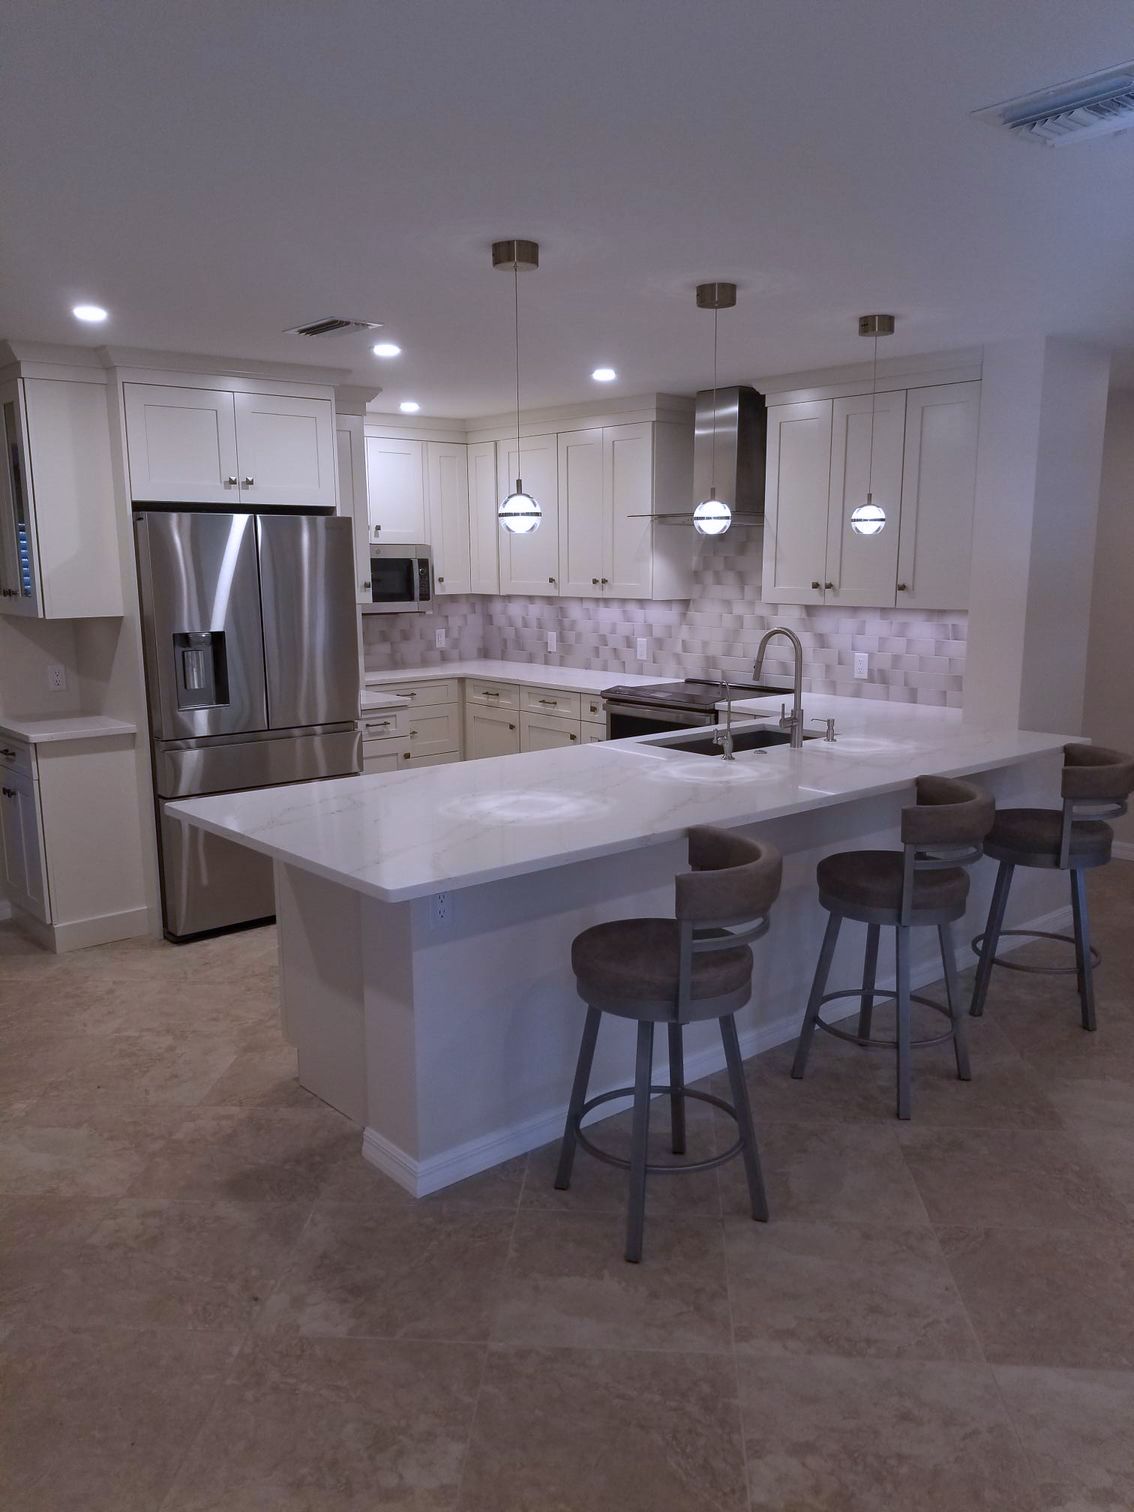 A kitchen with white cabinets, stainless steel appliances, and stool chairs